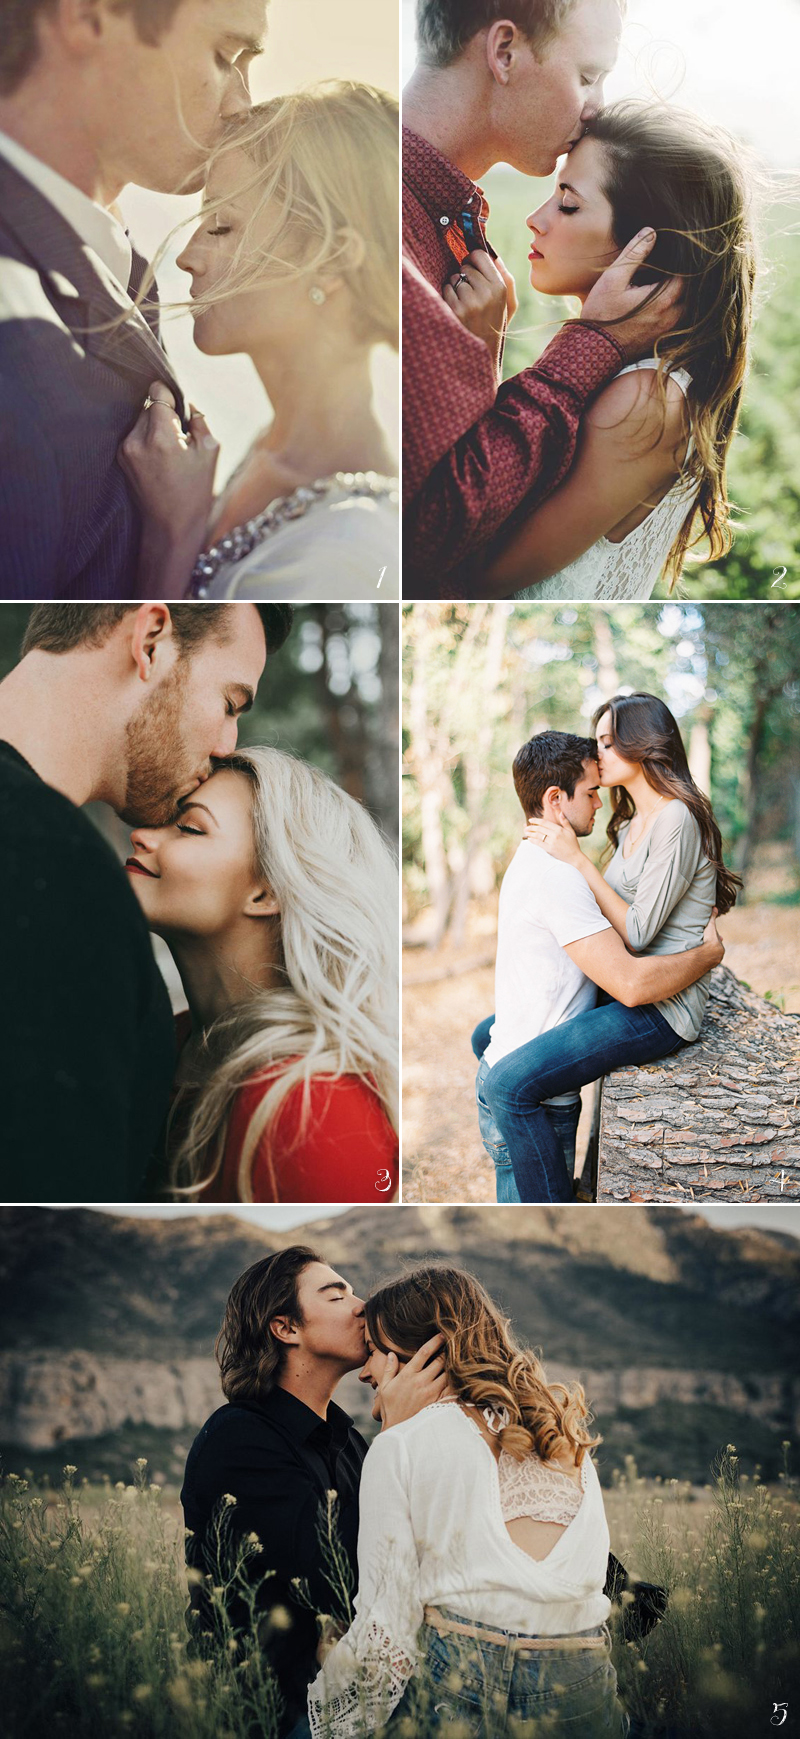 Couple Photoshoot Ideas with Cute Couple Pose Reference